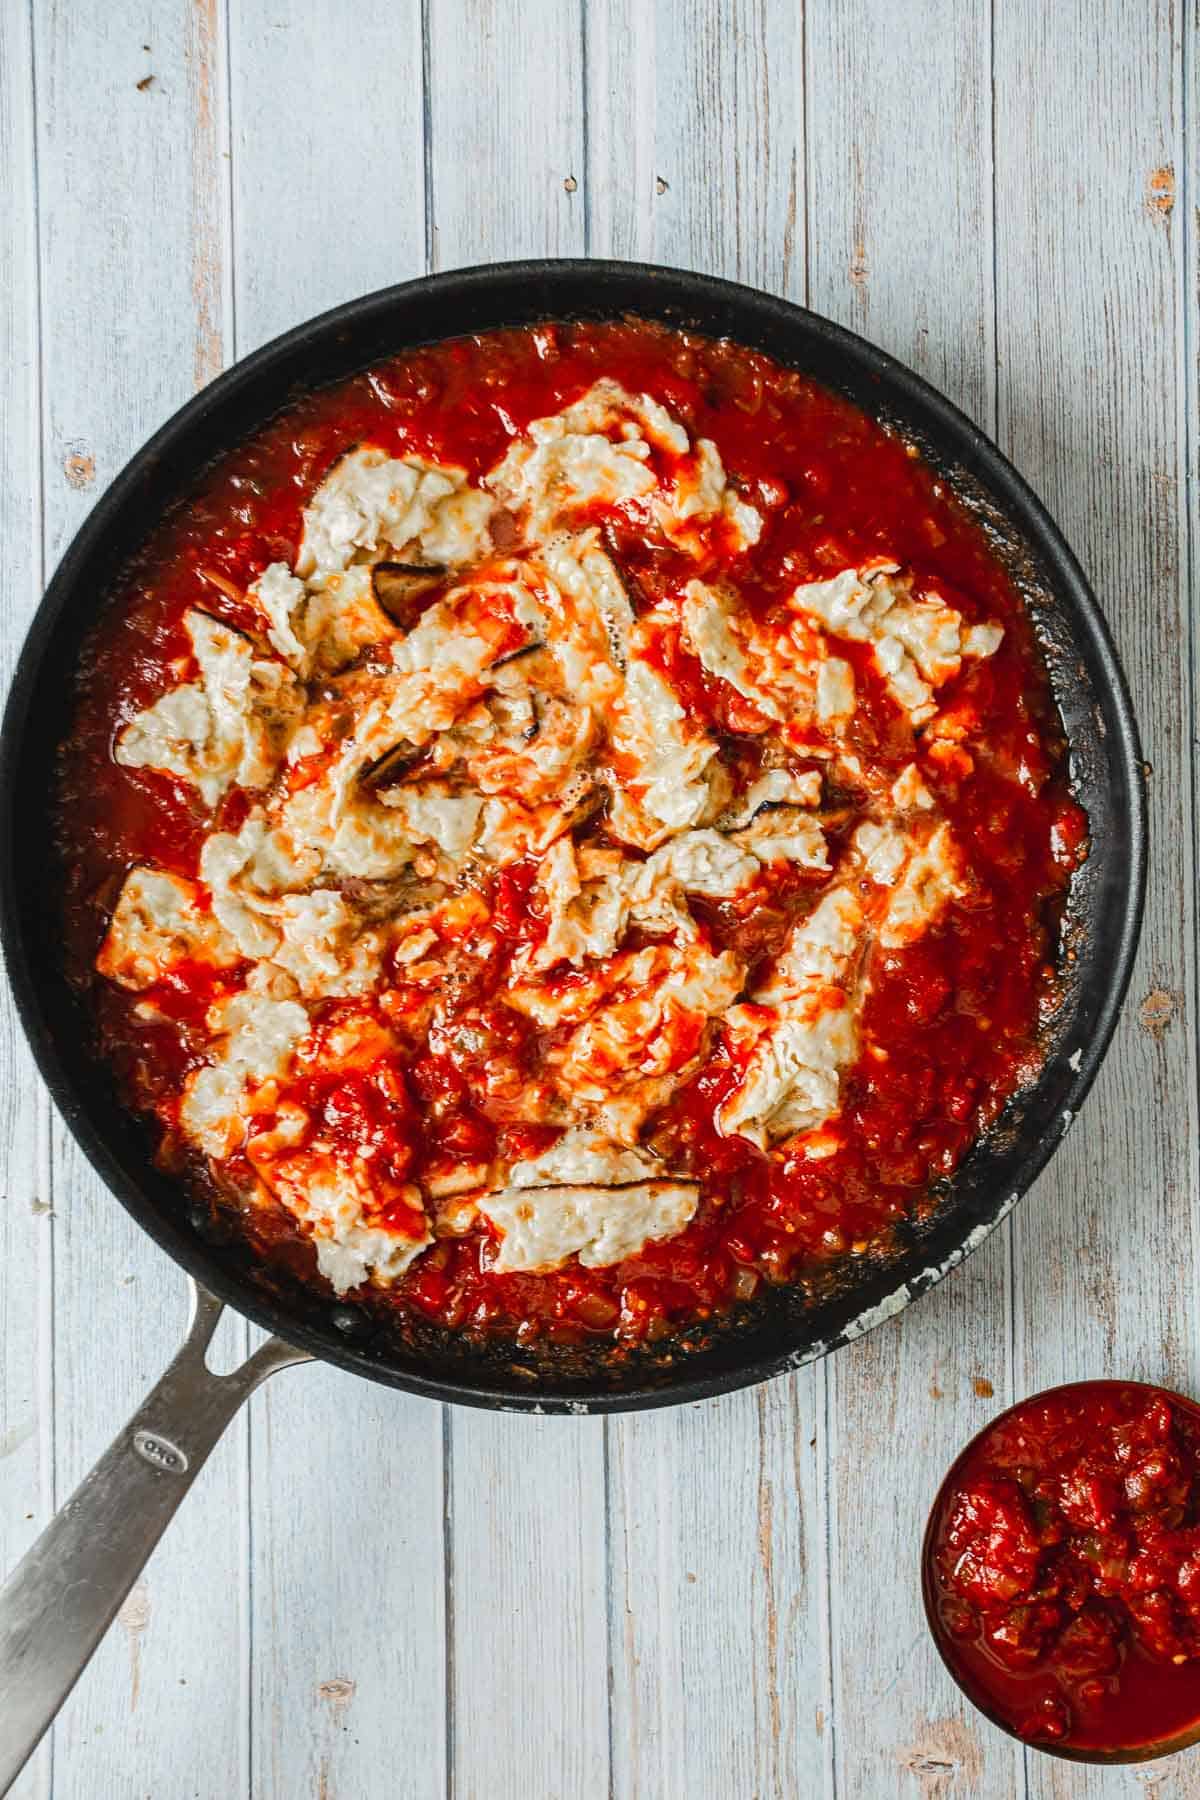 A skillet with tomato sauce, chunks of white cheese on a wooden surface, featuring Mexican Matzo Brei.